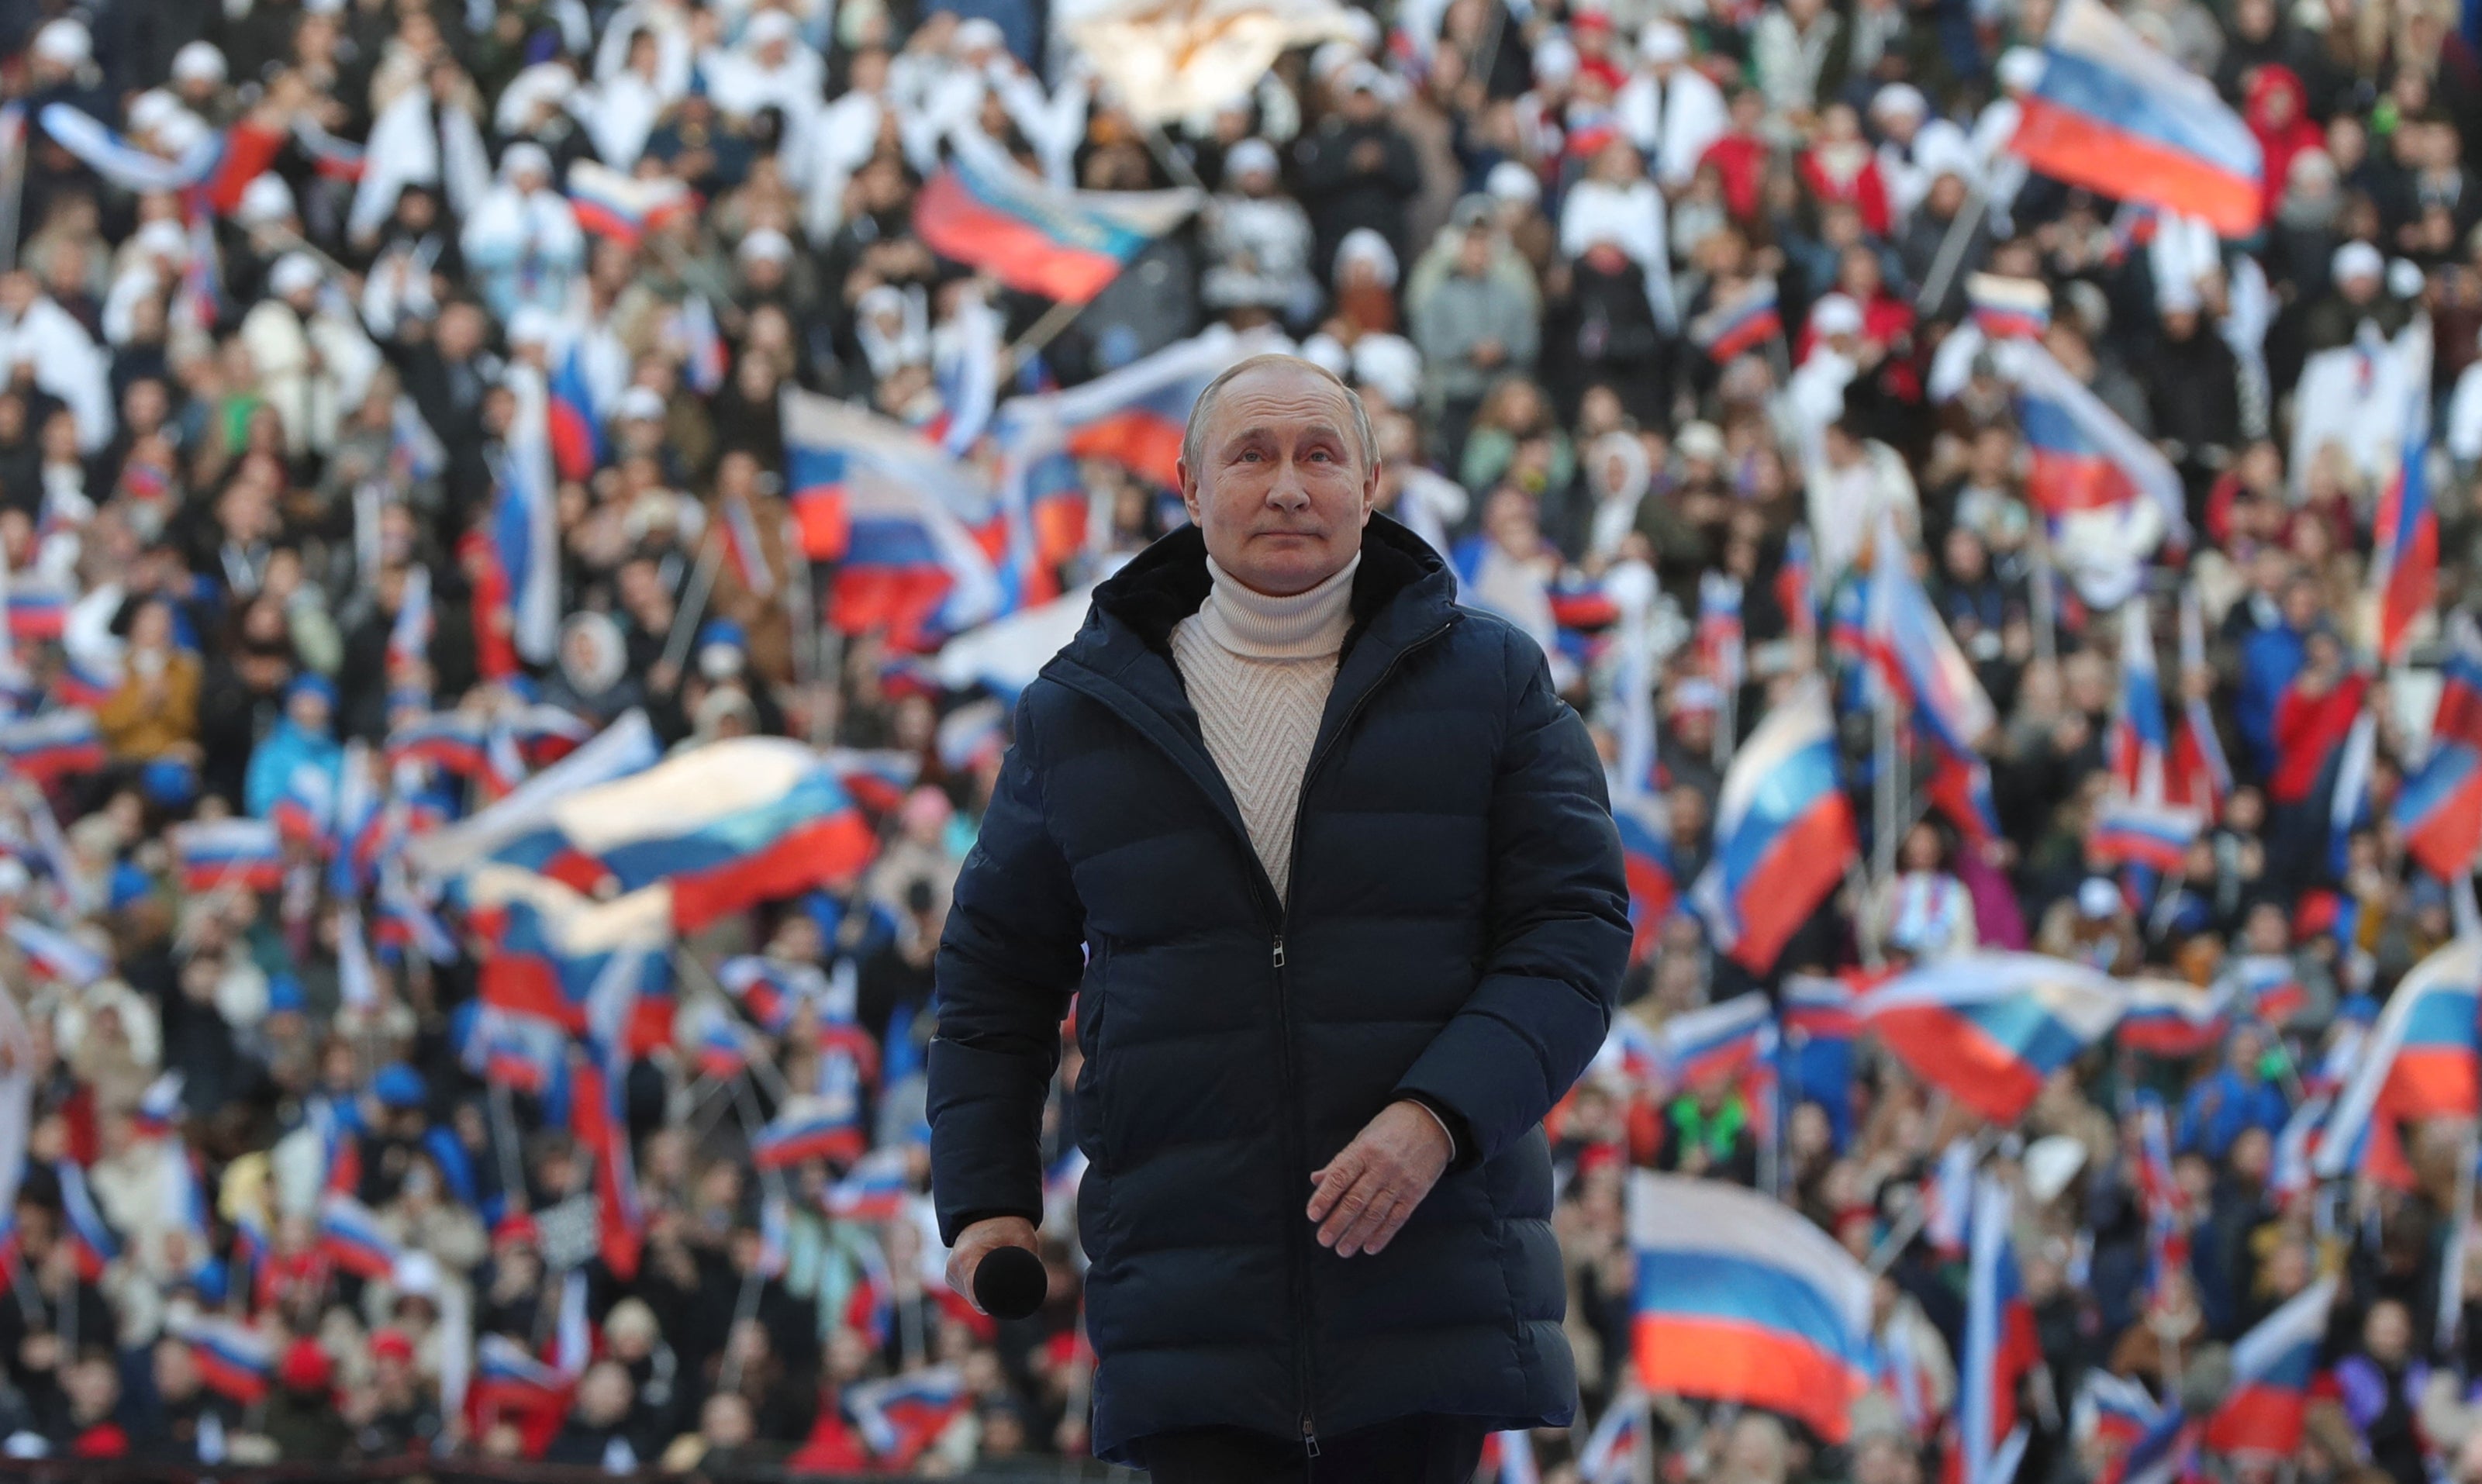 Vladimir Putin attends a concert marking the eighth anniversary of Russia's annexation of Crimea at the Luzhniki stadium in Moscow on March 18, 2022